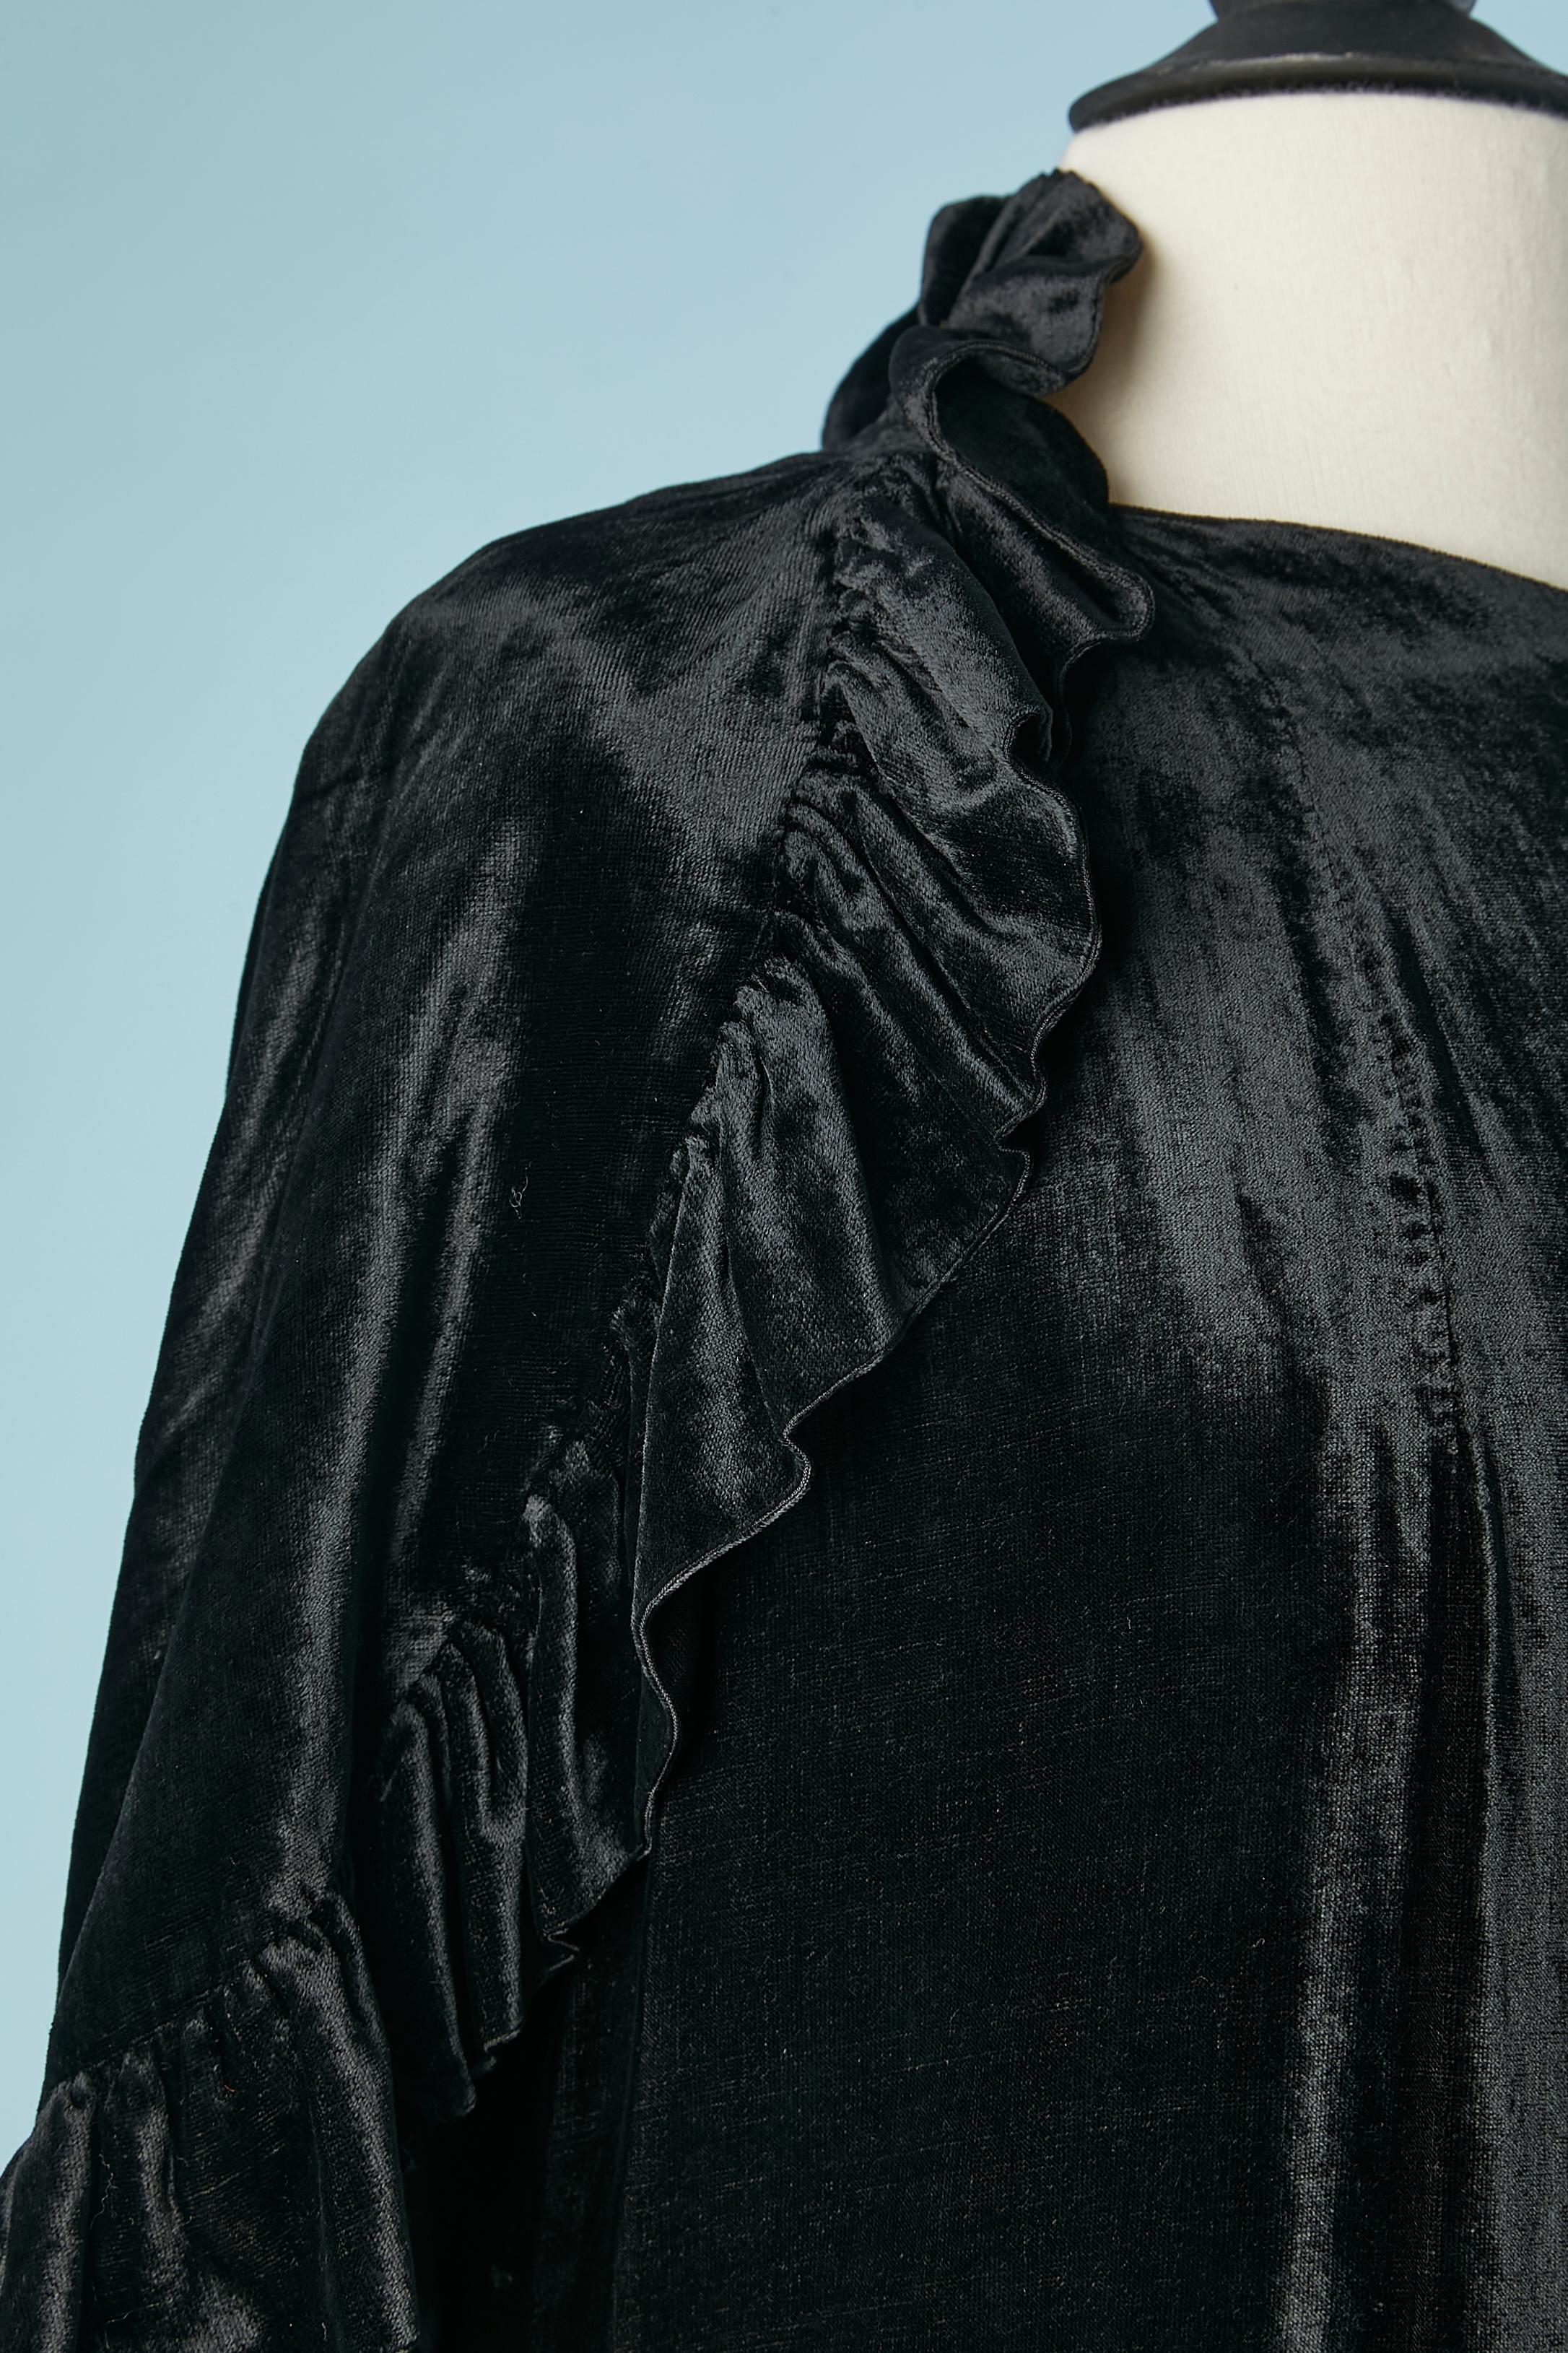 Black silk velvet sleeveless Opera coat with cape.
The coat is close with one snap on the top front and the cape is stitched to the coat. 
Black rayon lining. Ruffles edge on the coat and cape.
SIZE M